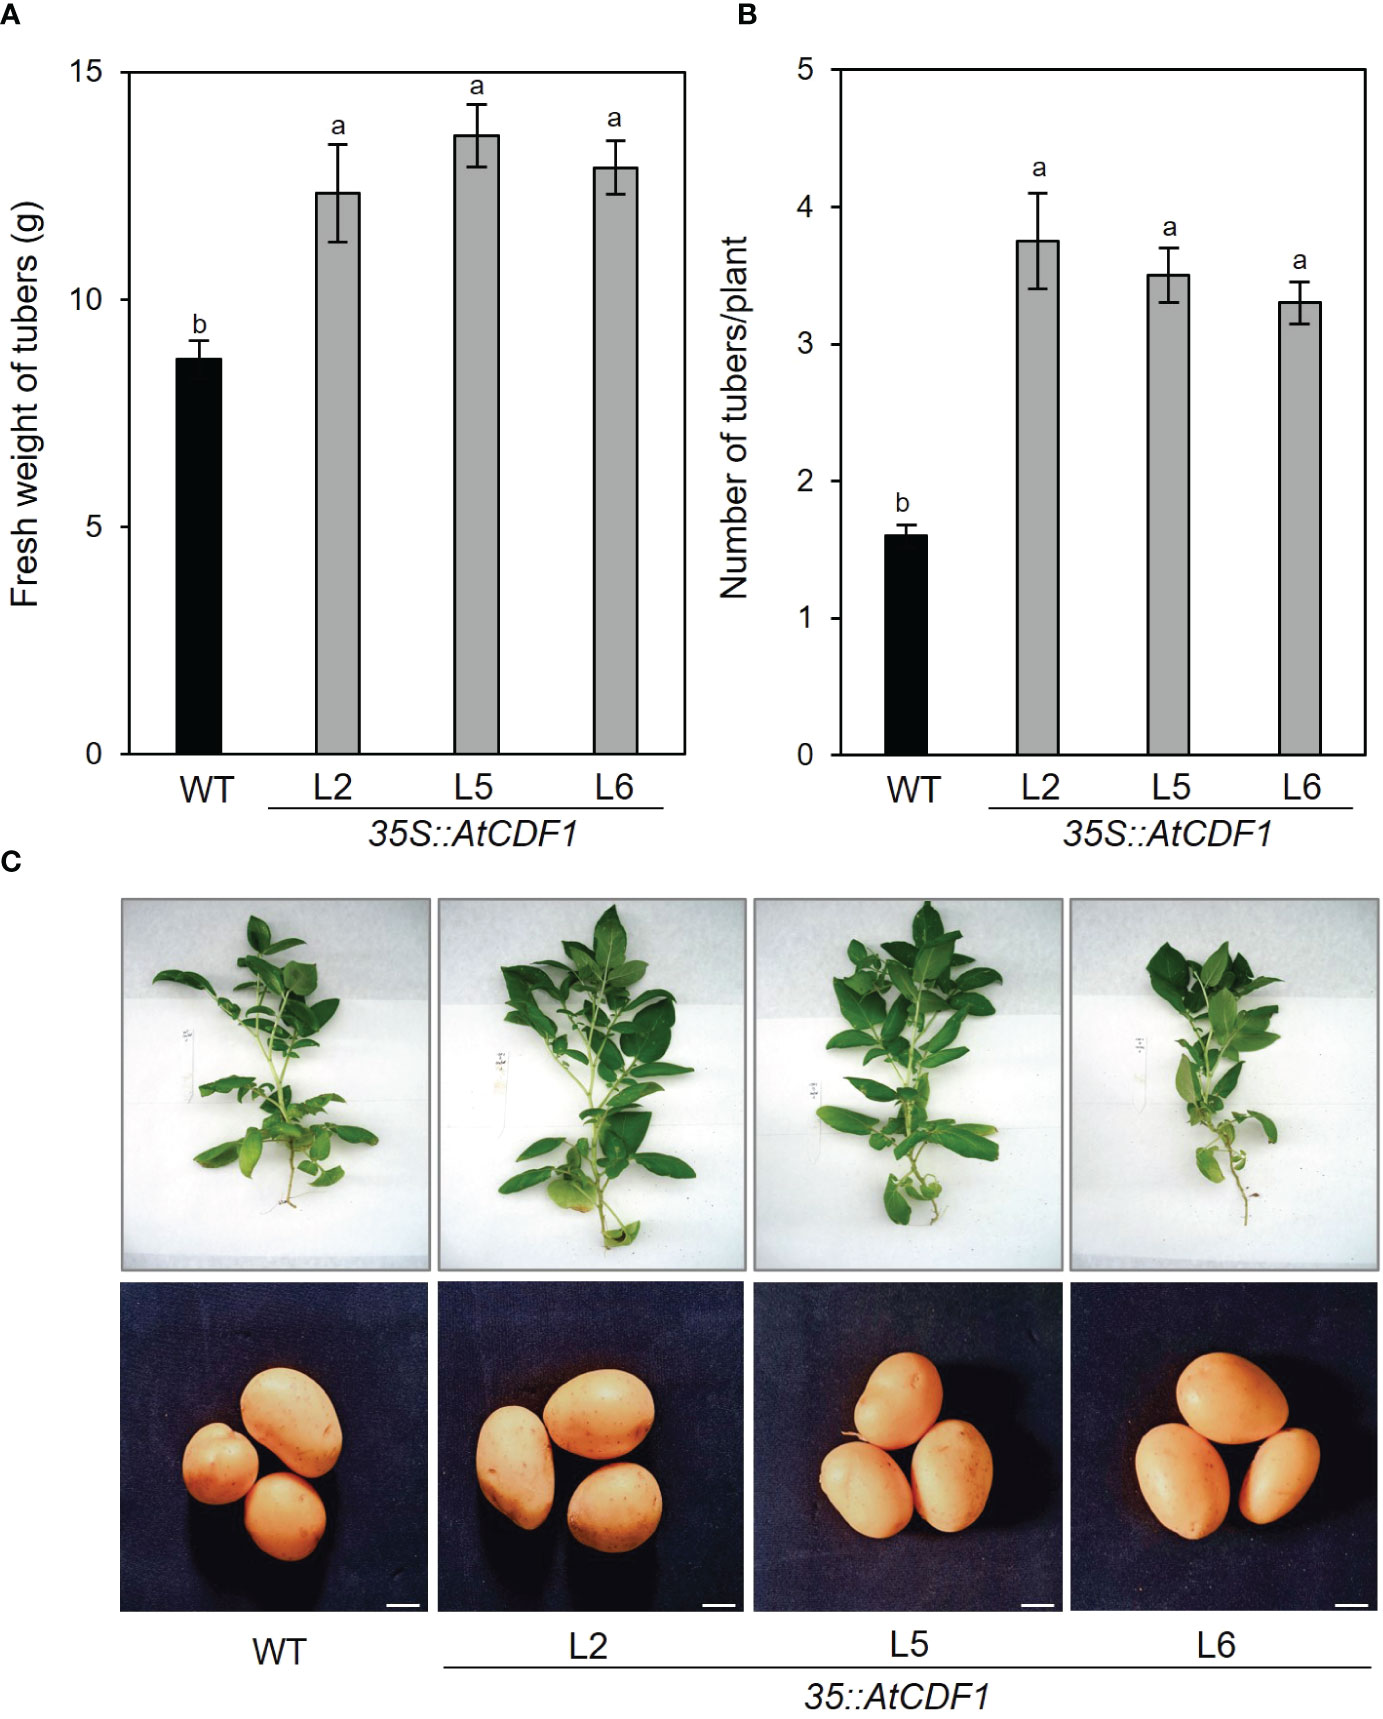 Frontiers Ectopic expression of the AtCDF1 transcription factor in potato enhances tuber starch and amino acid contents and yield under open field conditions picture image